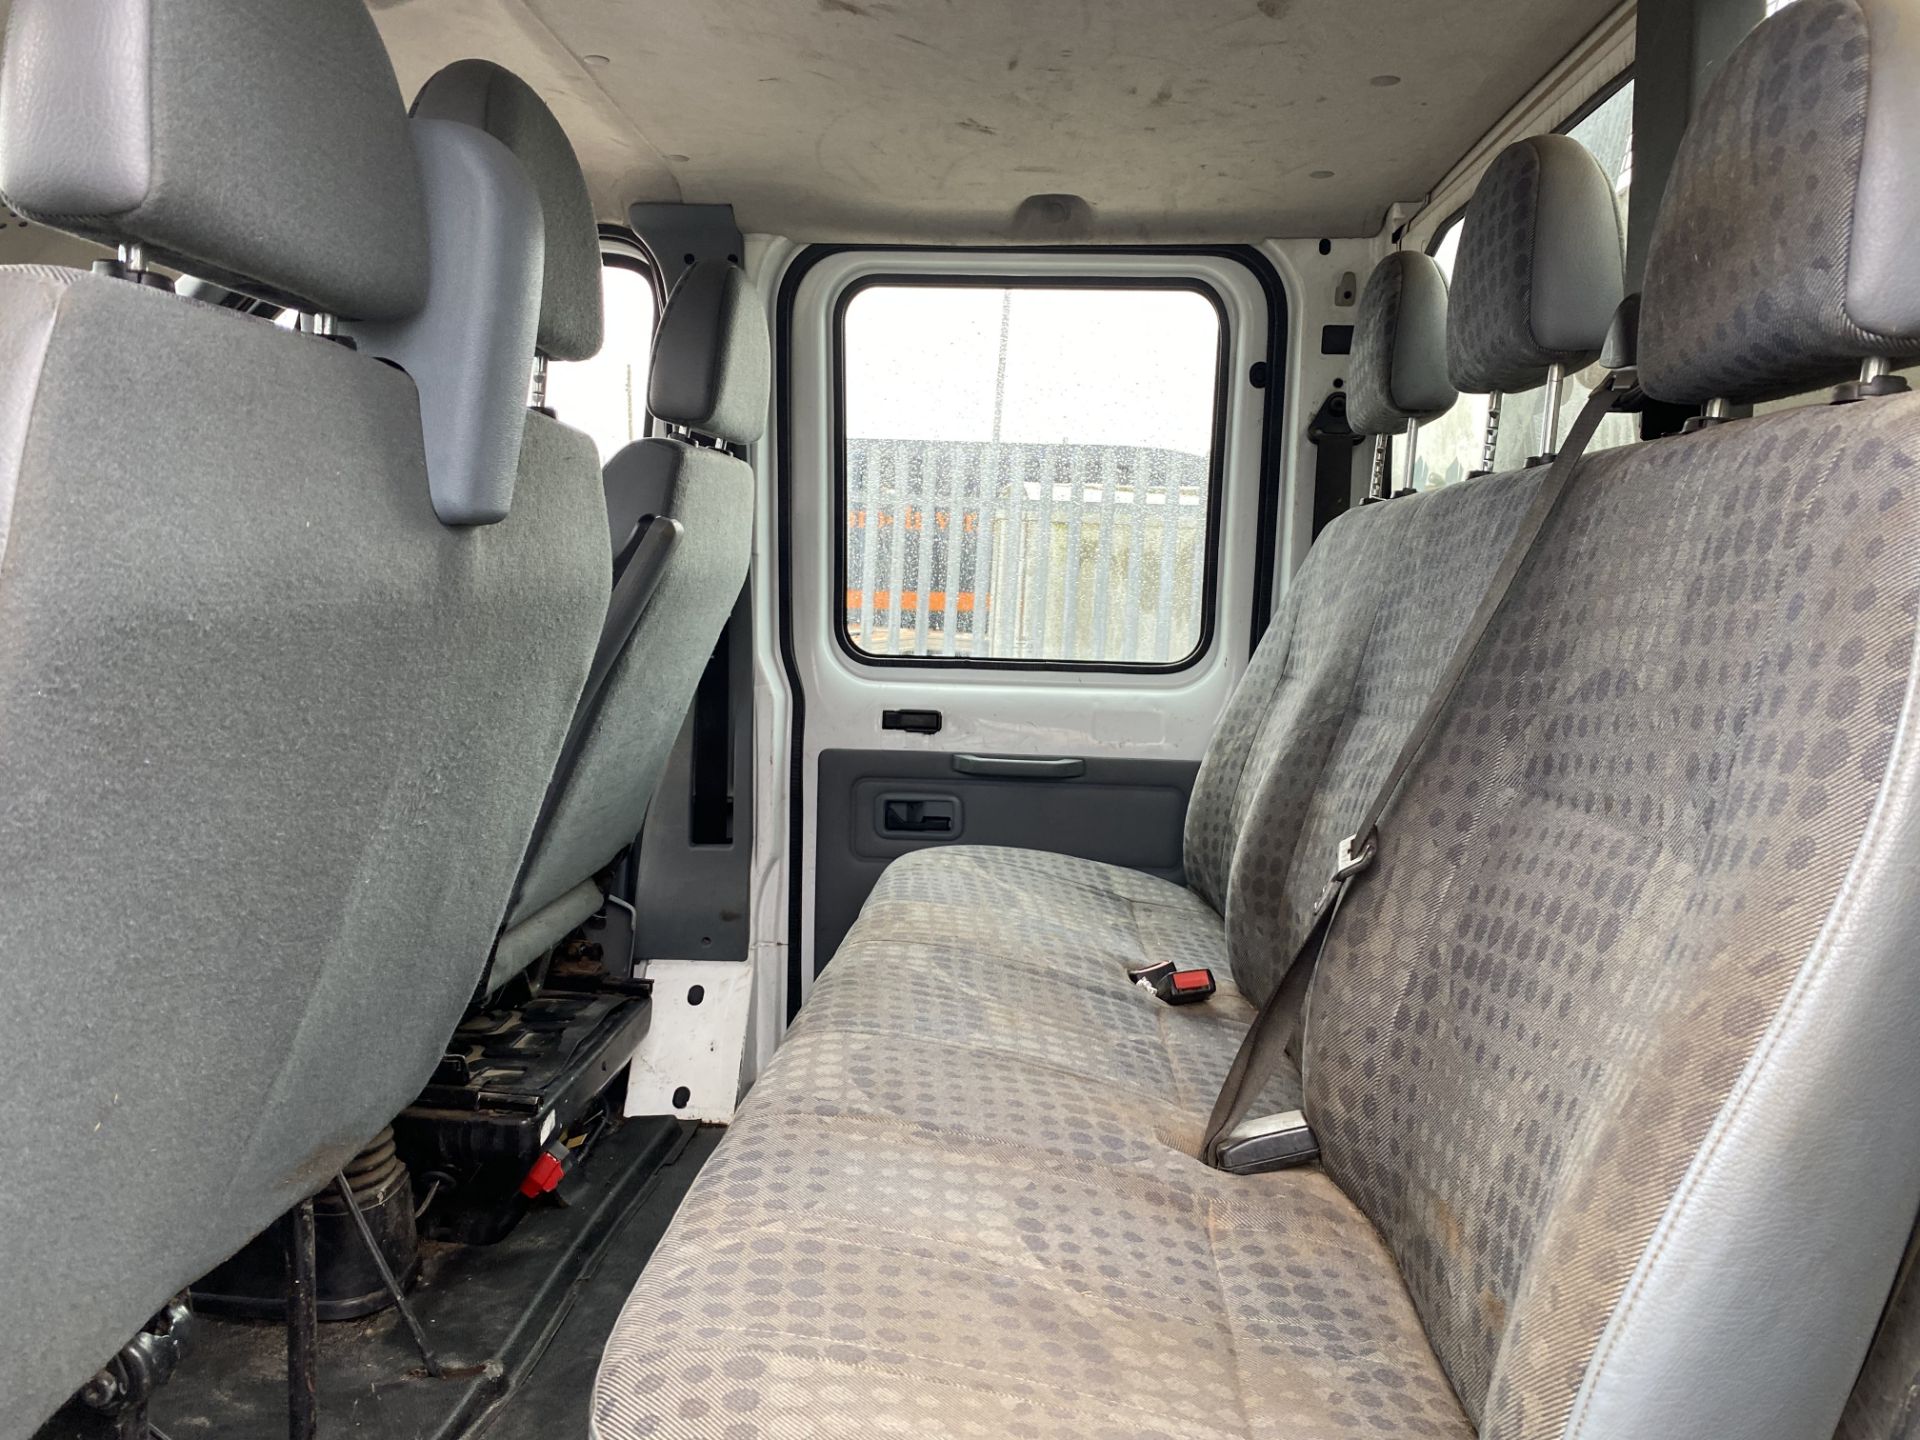 FORD TRANSIT T350L 2.4TDCI "LWB" DOUBLE CAB TIPPER - 61 REG - LOW MILEAGE - 3500KG GROSS - LOOK!!! - Image 8 of 18